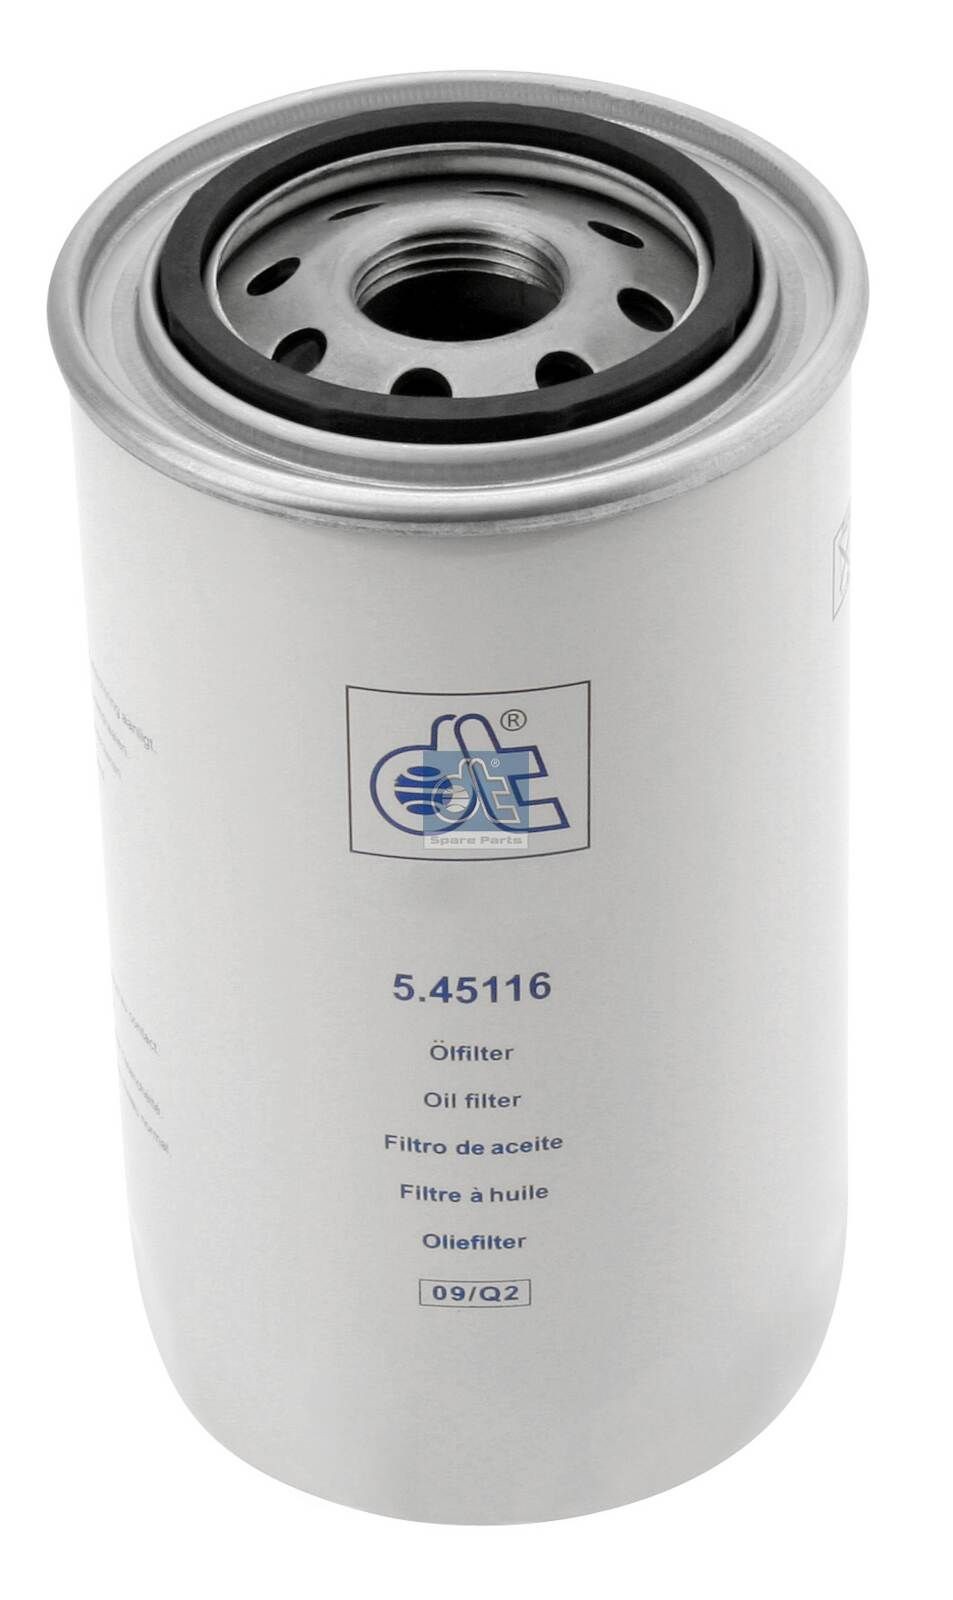 H19W10 DT Spare Parts 5.45116 Oil filter 4 897 898